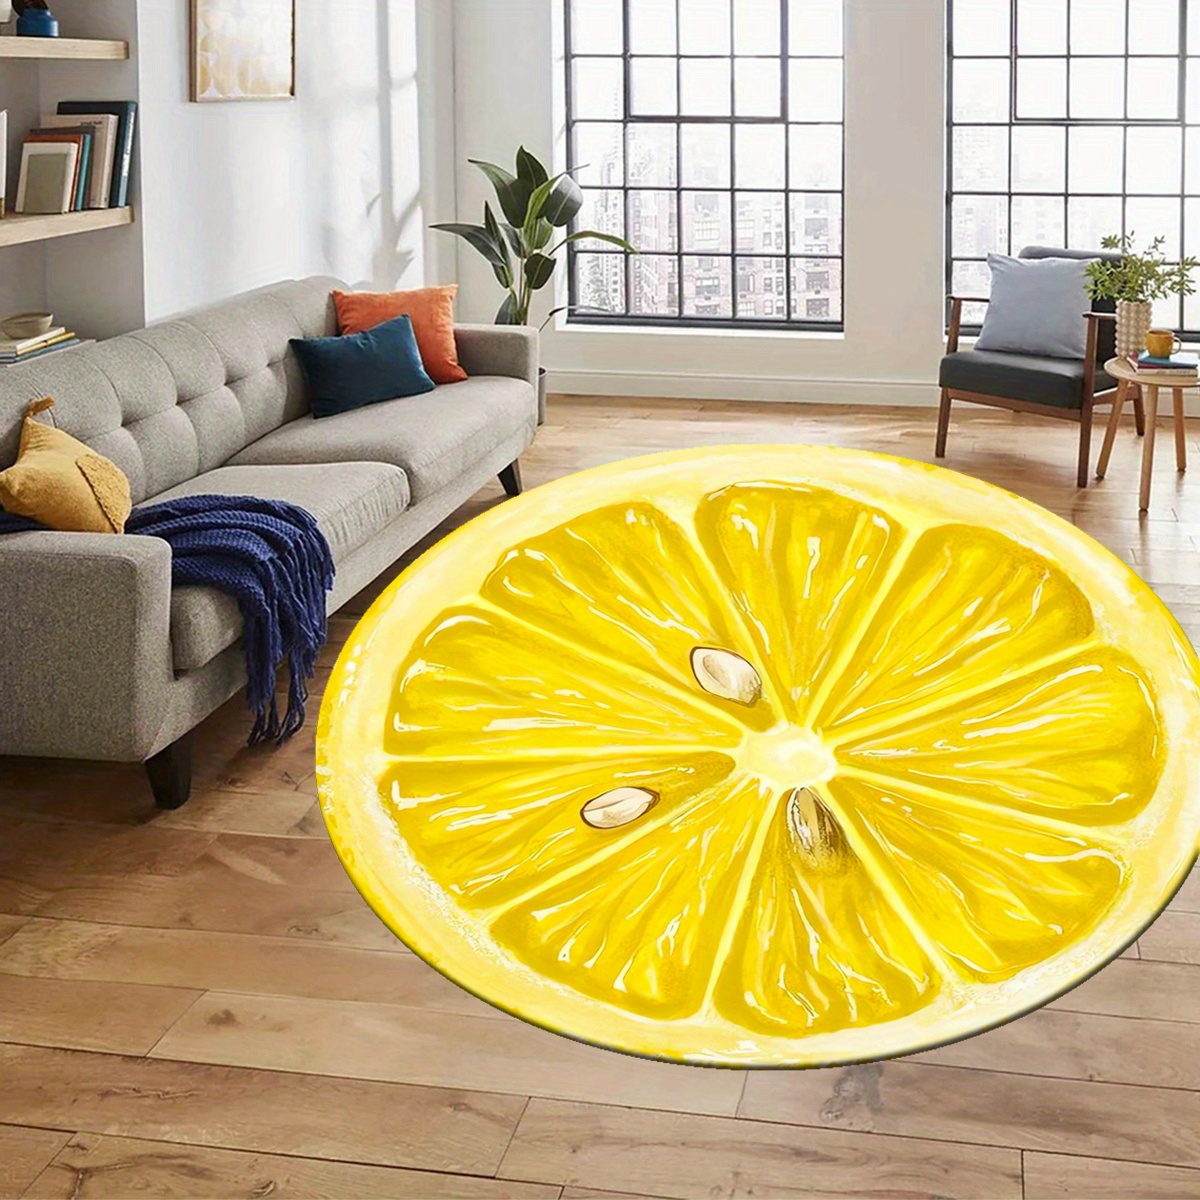 

1pc Polyester Lemon Slice Round Rug - Crystal Velvet Washable Non-slip Carpet For Office, Room, Indoor Use - Soft Home Decor Mat For Hallways, Kitchens, Laundry Rooms, Bathrooms, Living Spaces